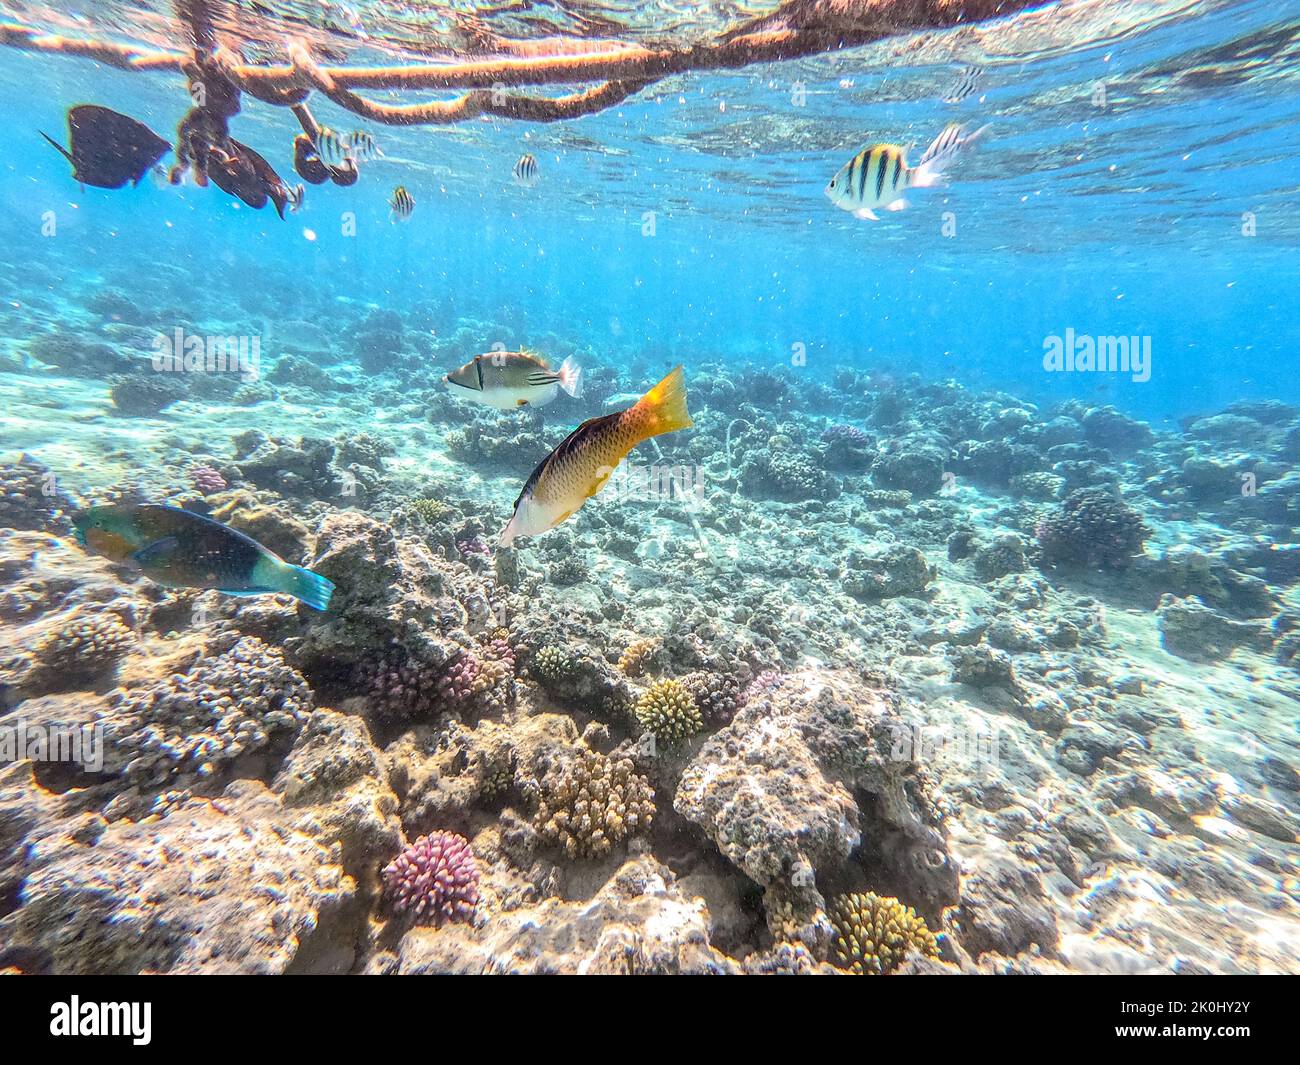 Birdmouth wrasse known as Gomphosus Caeruleus underwater at the coral reef. Underwater life of reef with corals and tropical fish. Coral Reef at the R Stock Photo